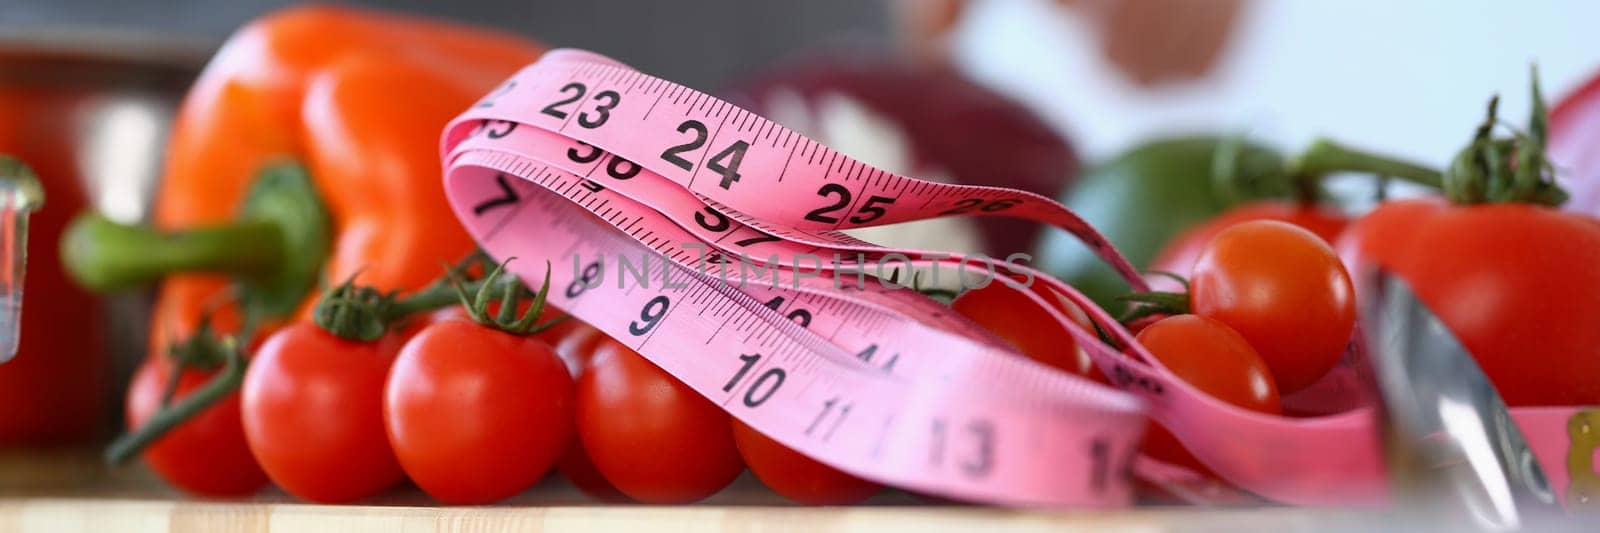 Red tomatoes measuring tape and vegetables in kitchen. Vegetable diet and vitamins concept